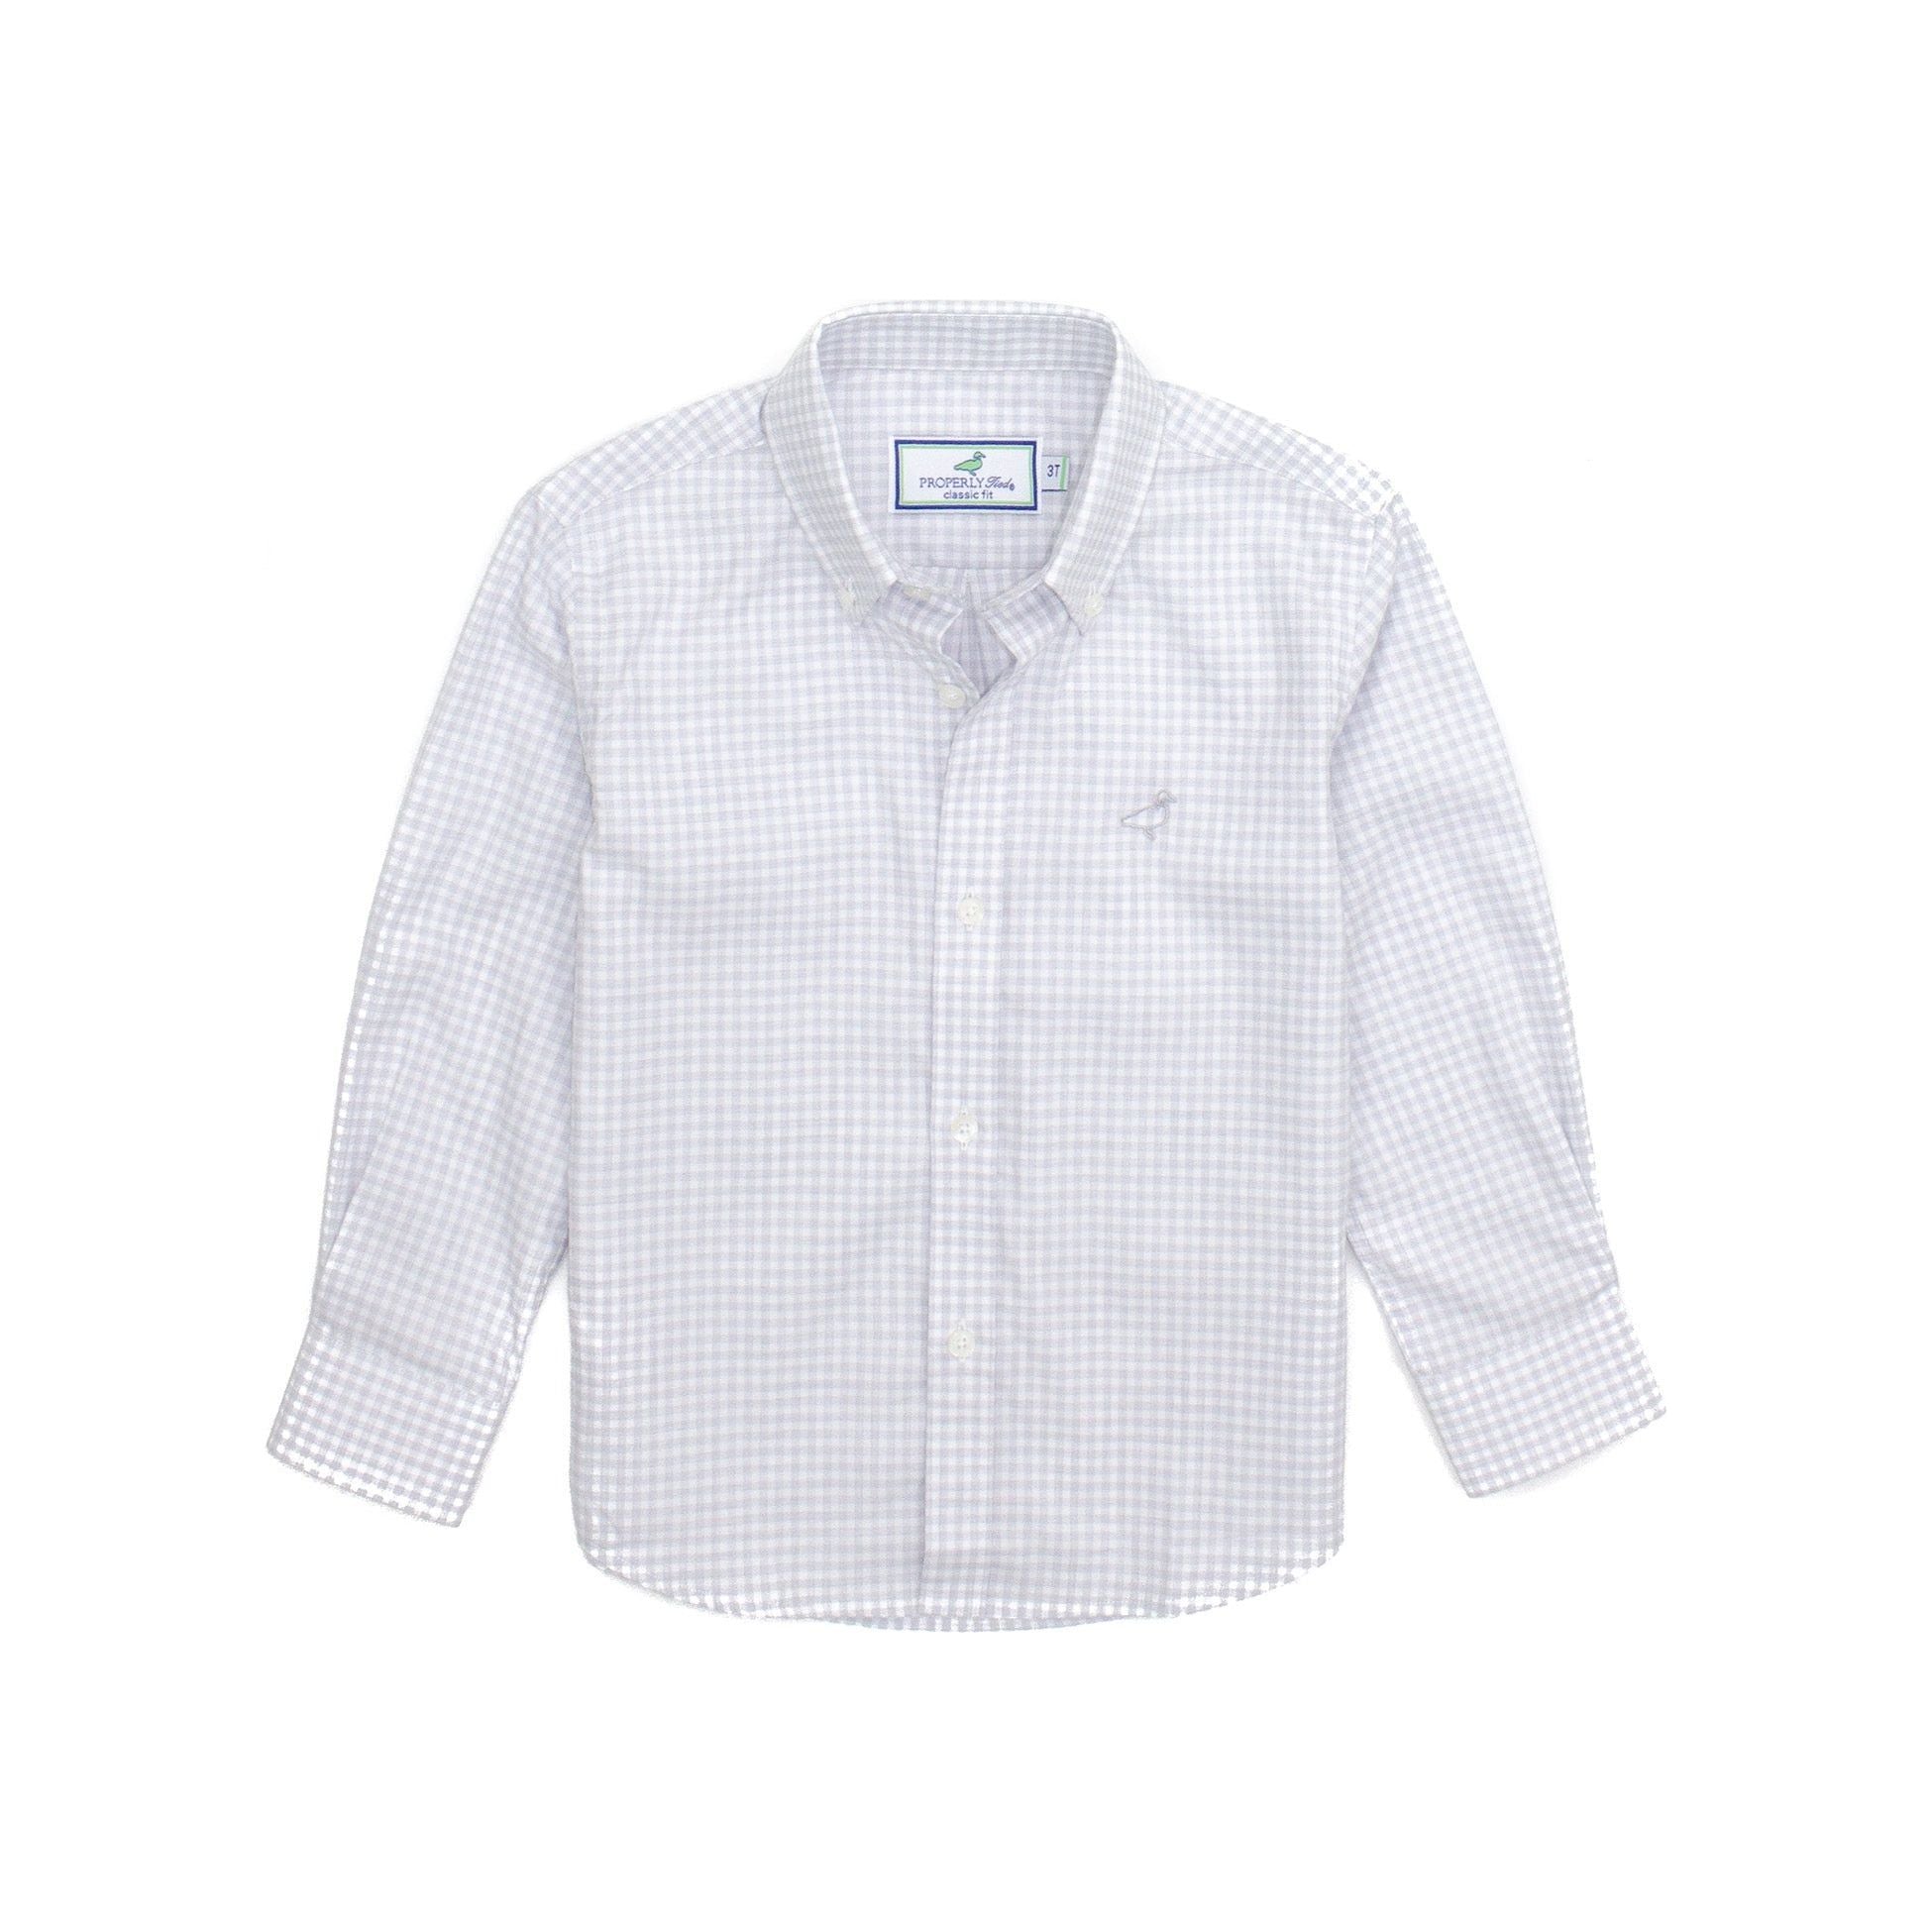 light grey and white checked button down sportshirt with gray mallard logo on left chest